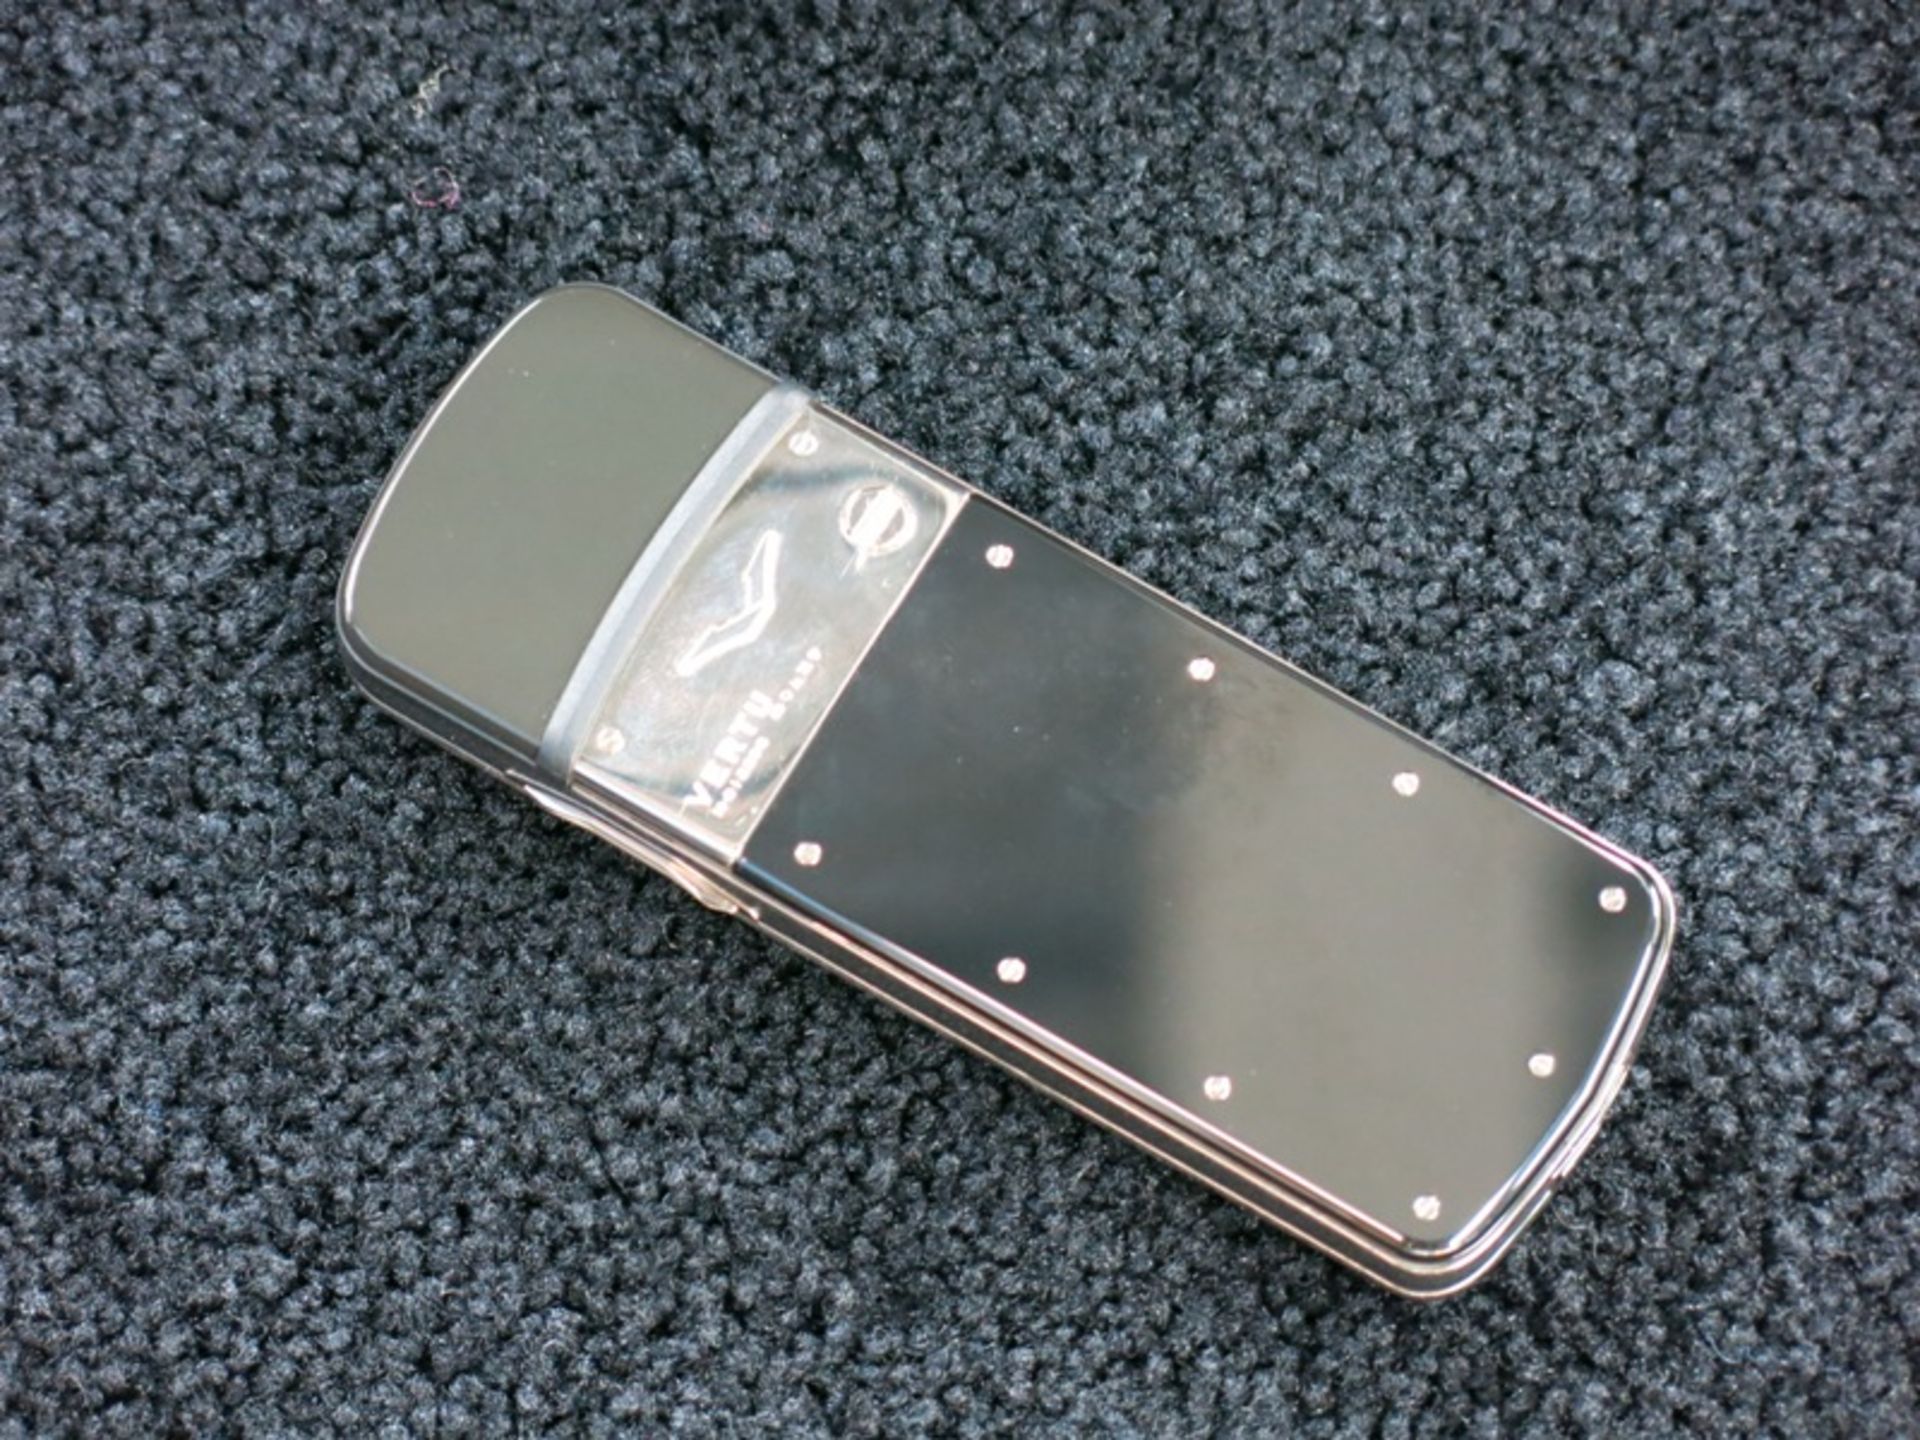 Vertu Signature Classic Phone in 18kt White Gold Phone with Full Pave Diamond Outer Cover & 18kt - Image 7 of 7